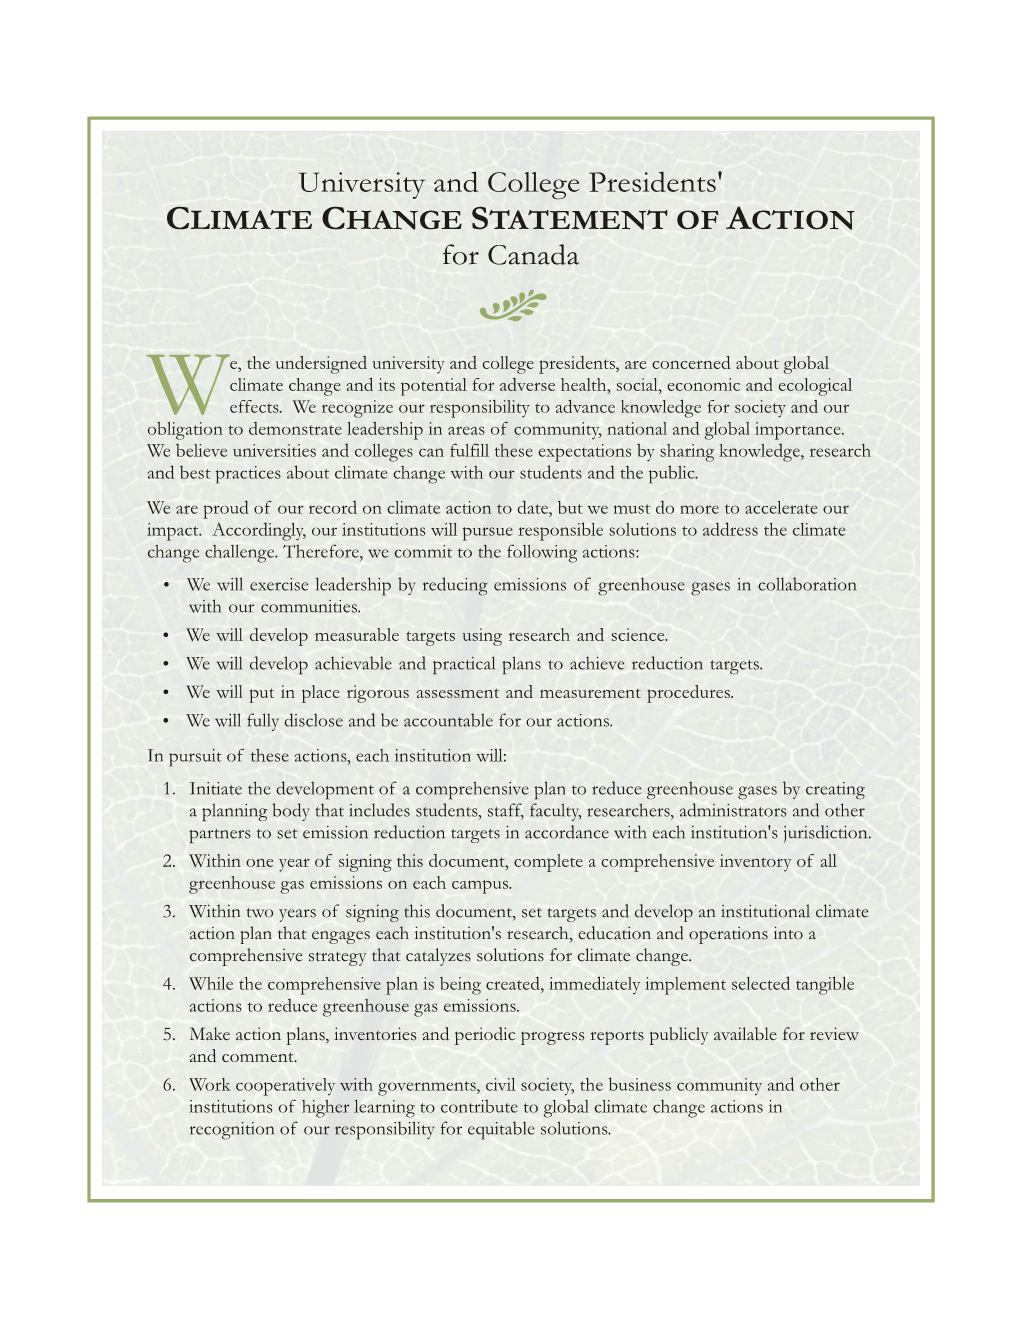 CLIMATE CHANGE STATEMENT of ACTION for Canada